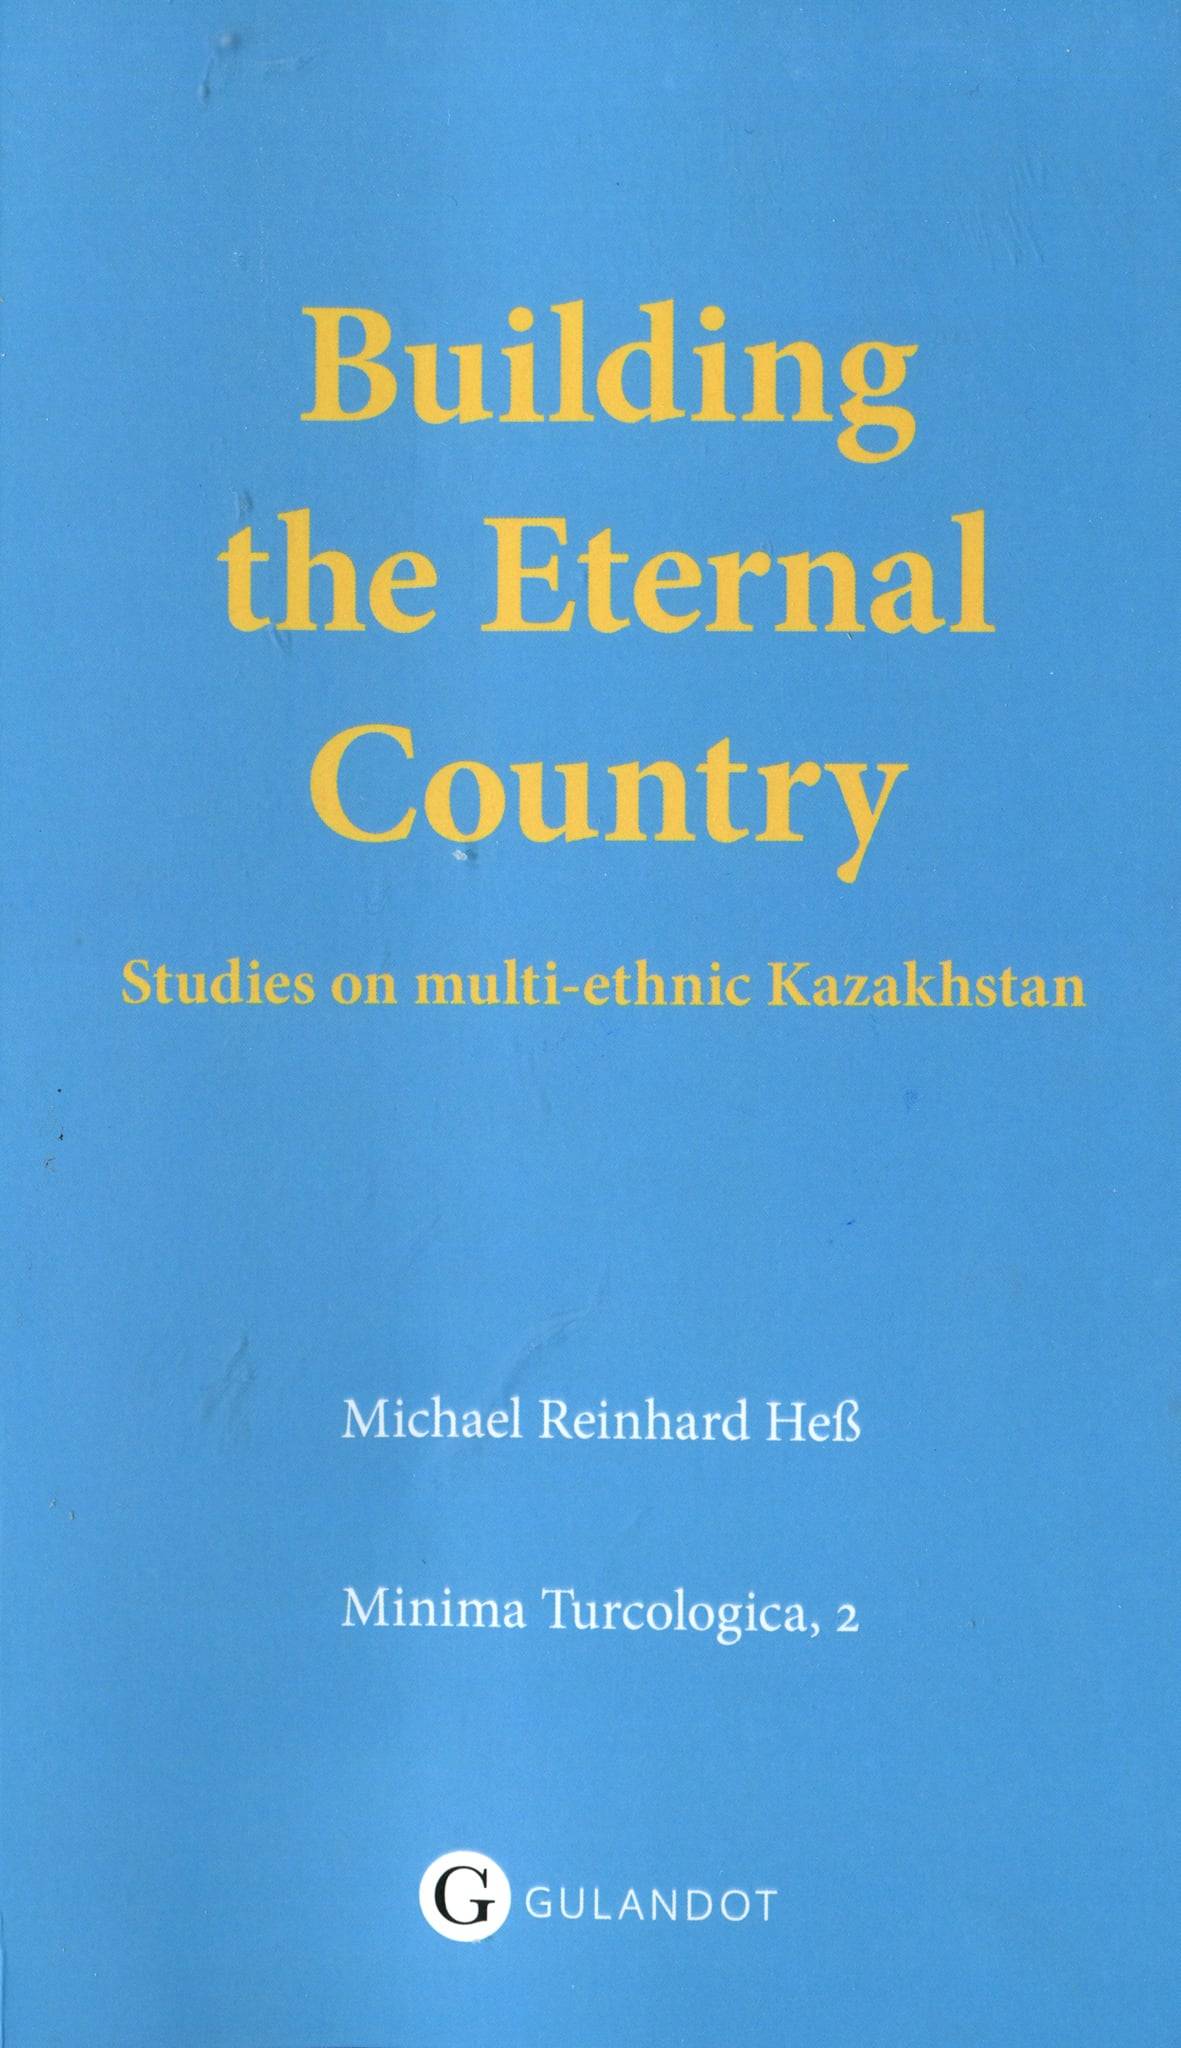 A new scholarly book “Building the Eternal Country” — Kazakhstan